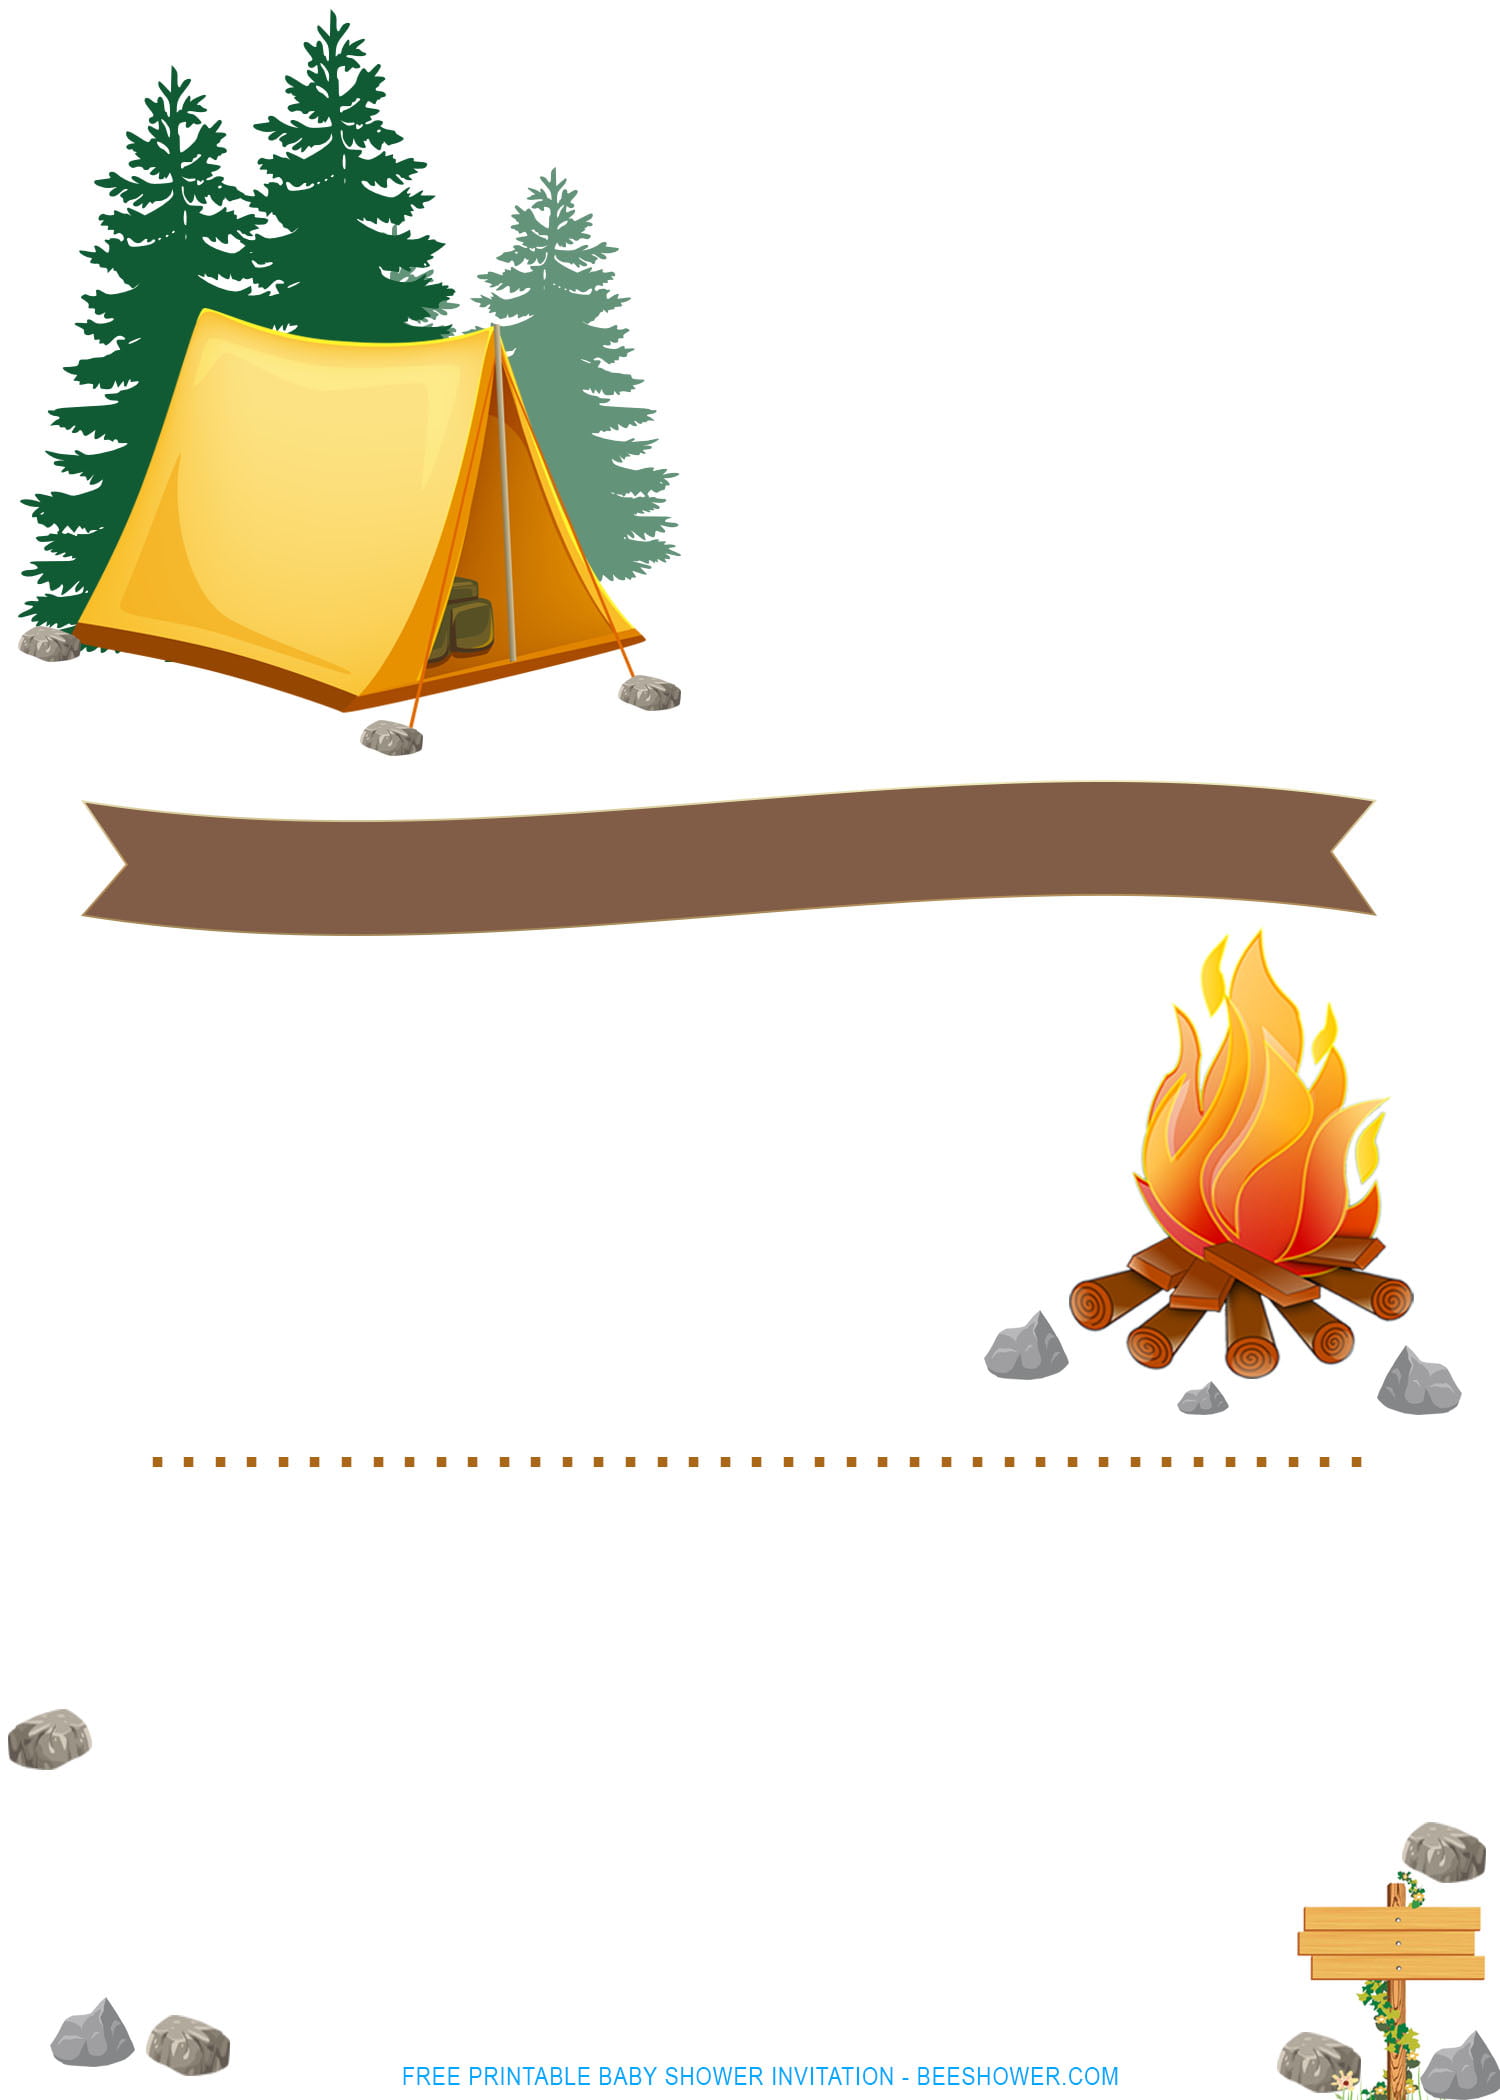 get-camping-party-invitations-pics-us-invitation-template